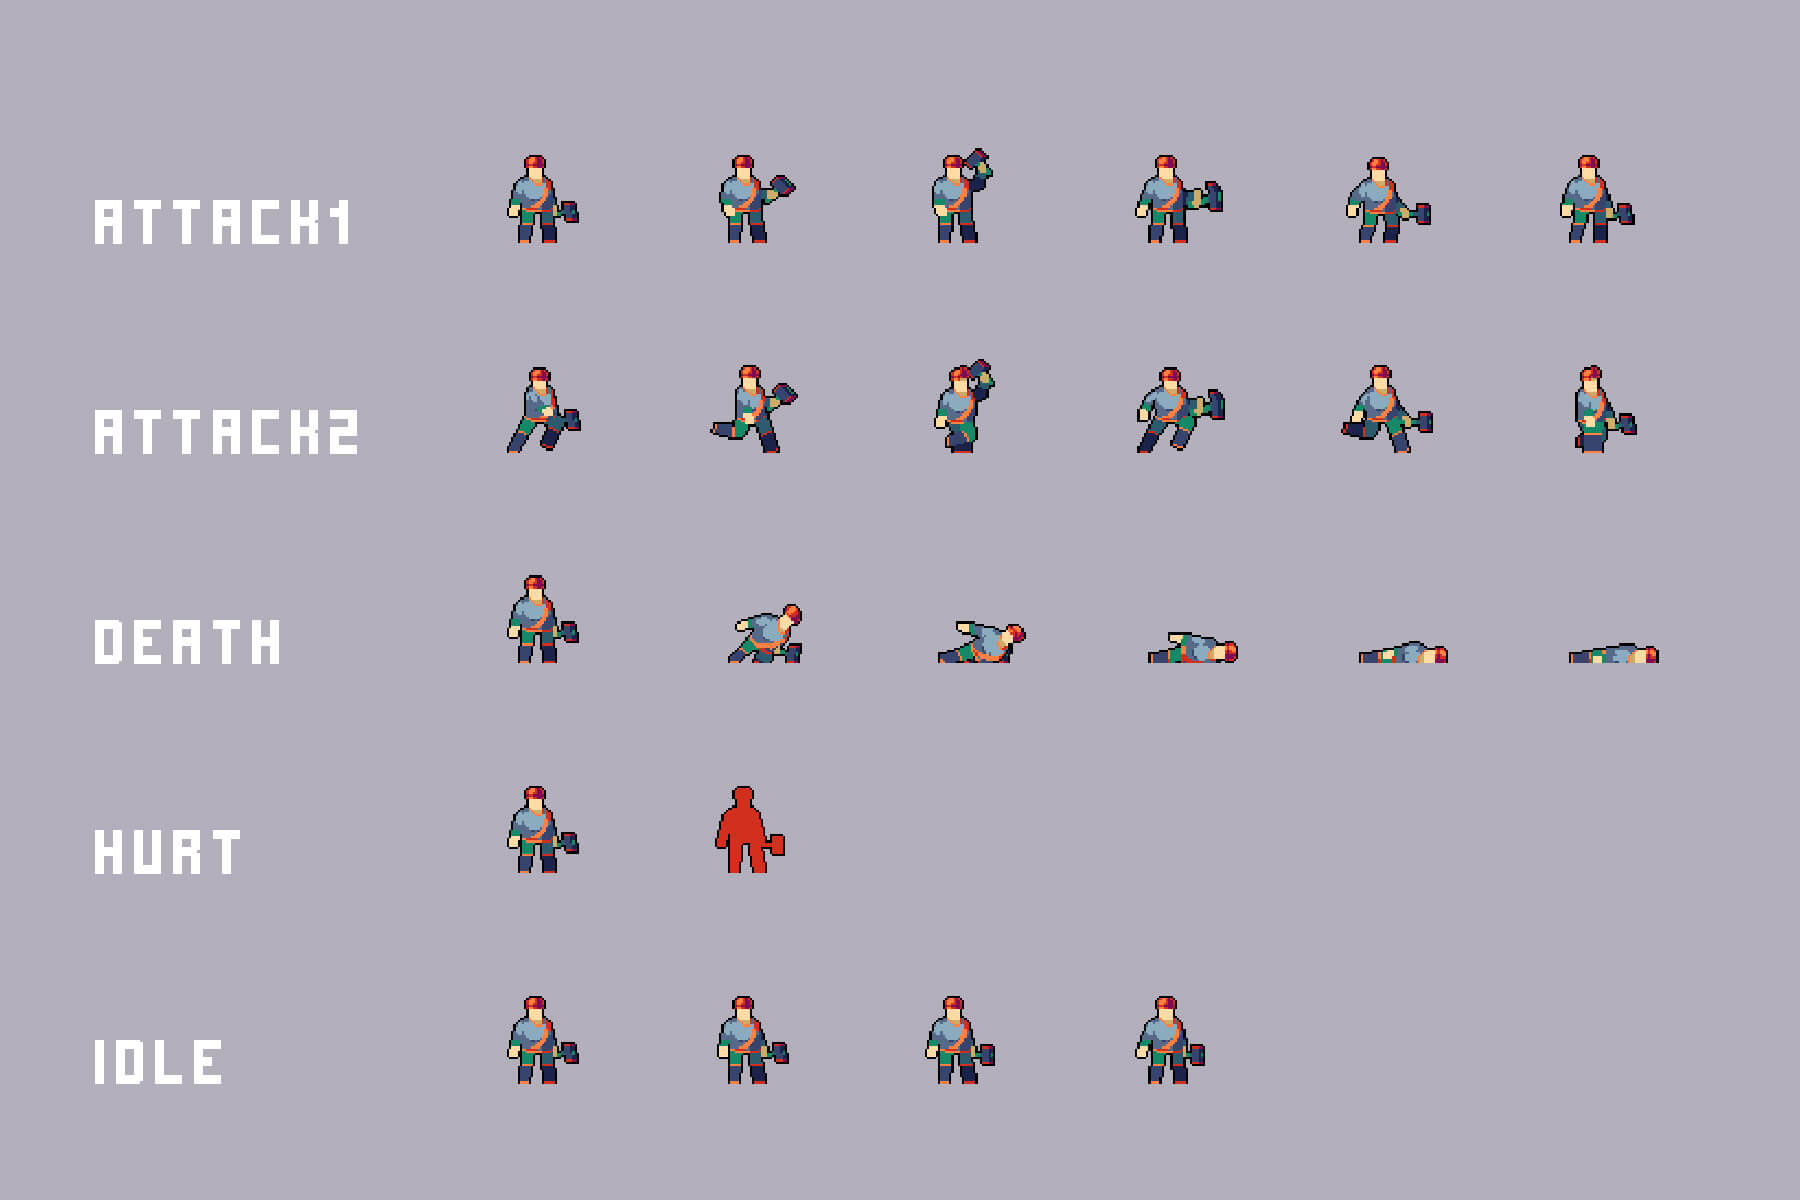 Sewerage Characters Pixel Art by Free Game Assets (GUI, Sprite, Tilesets)